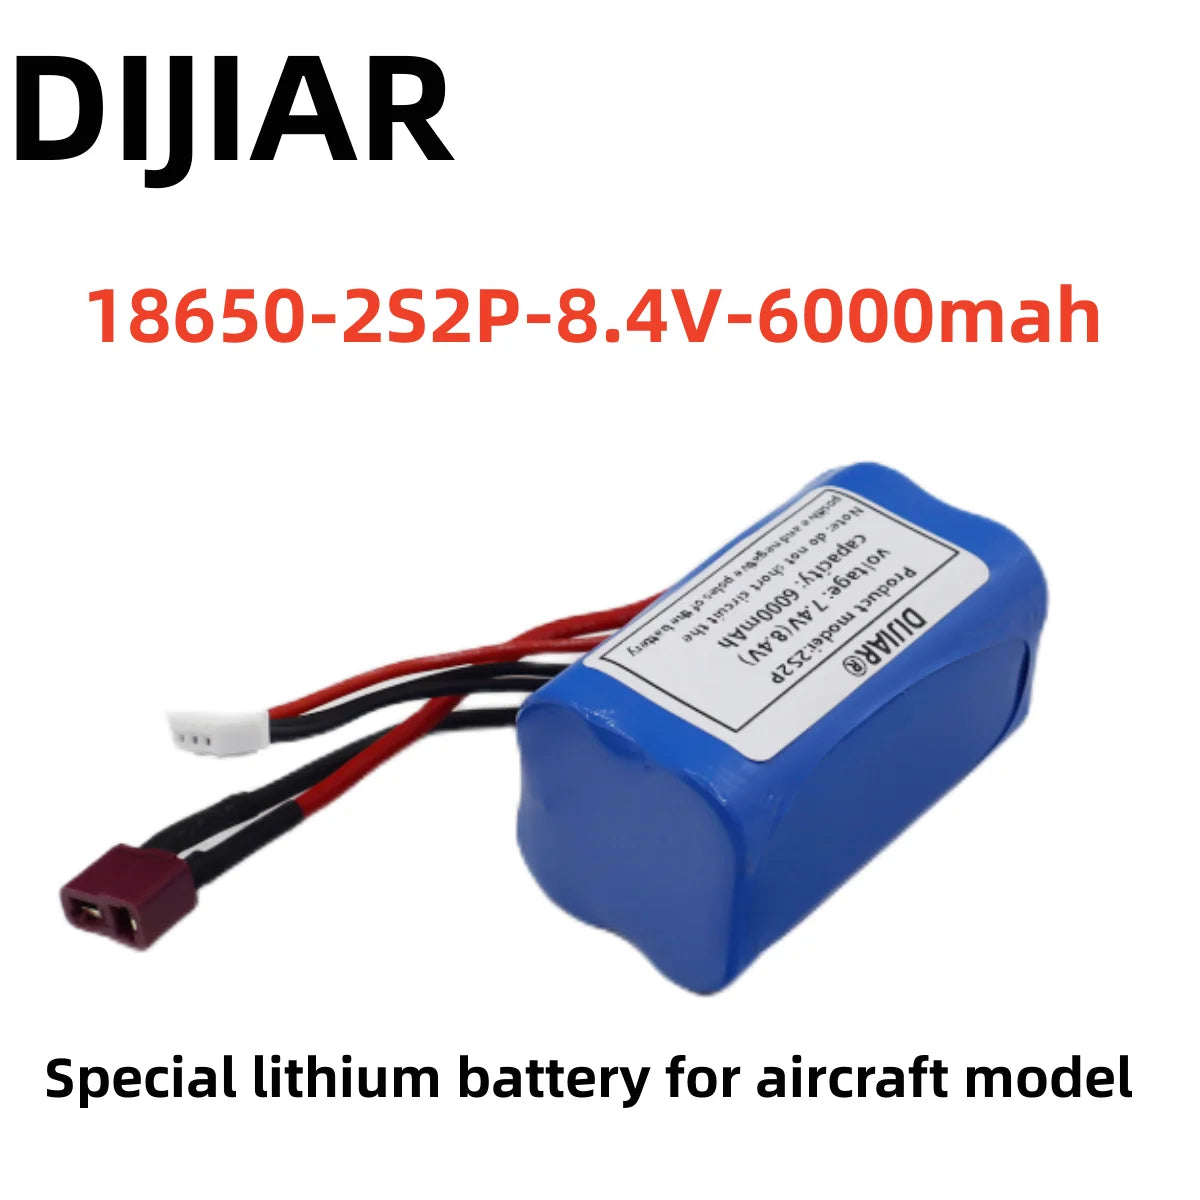 lithium battery for aircraft model Auzede > ou 6eti0